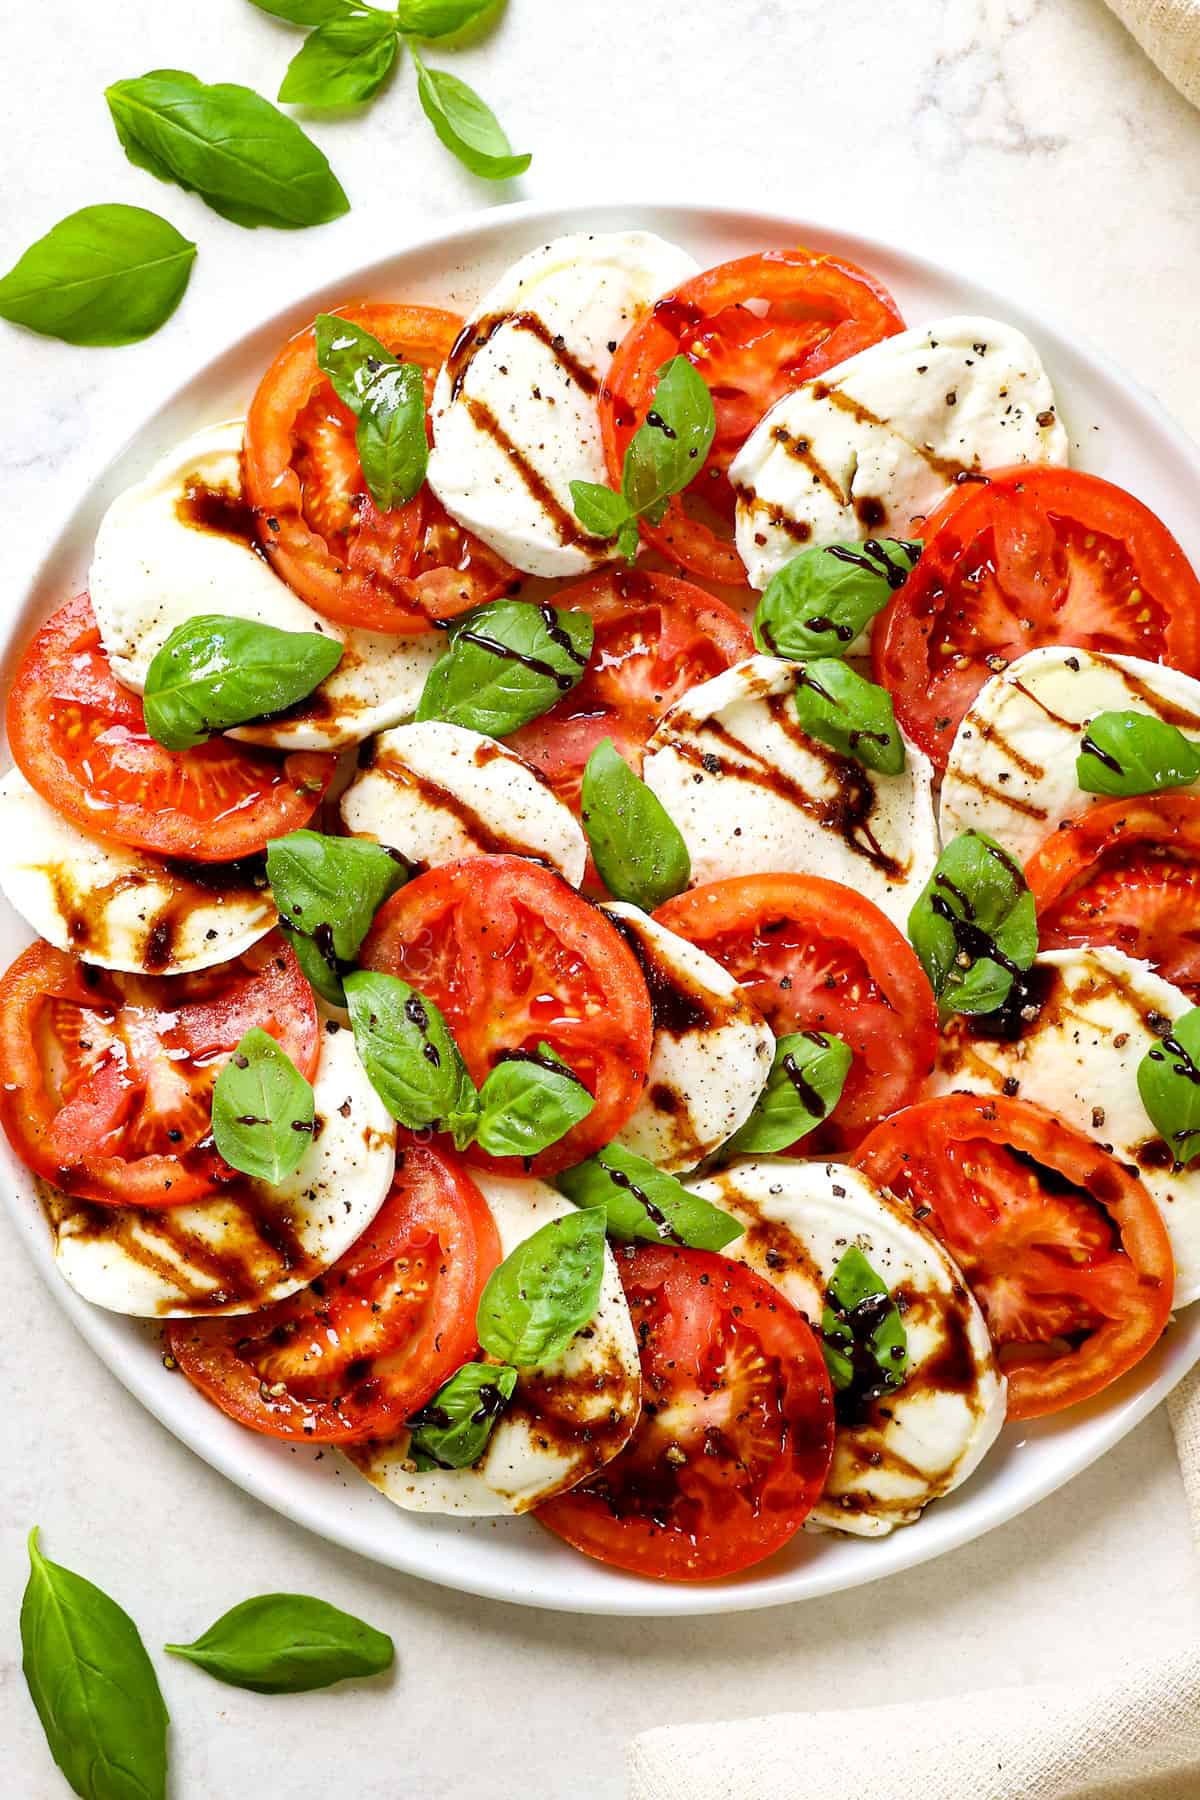 top view of Caprese salad served on a plate